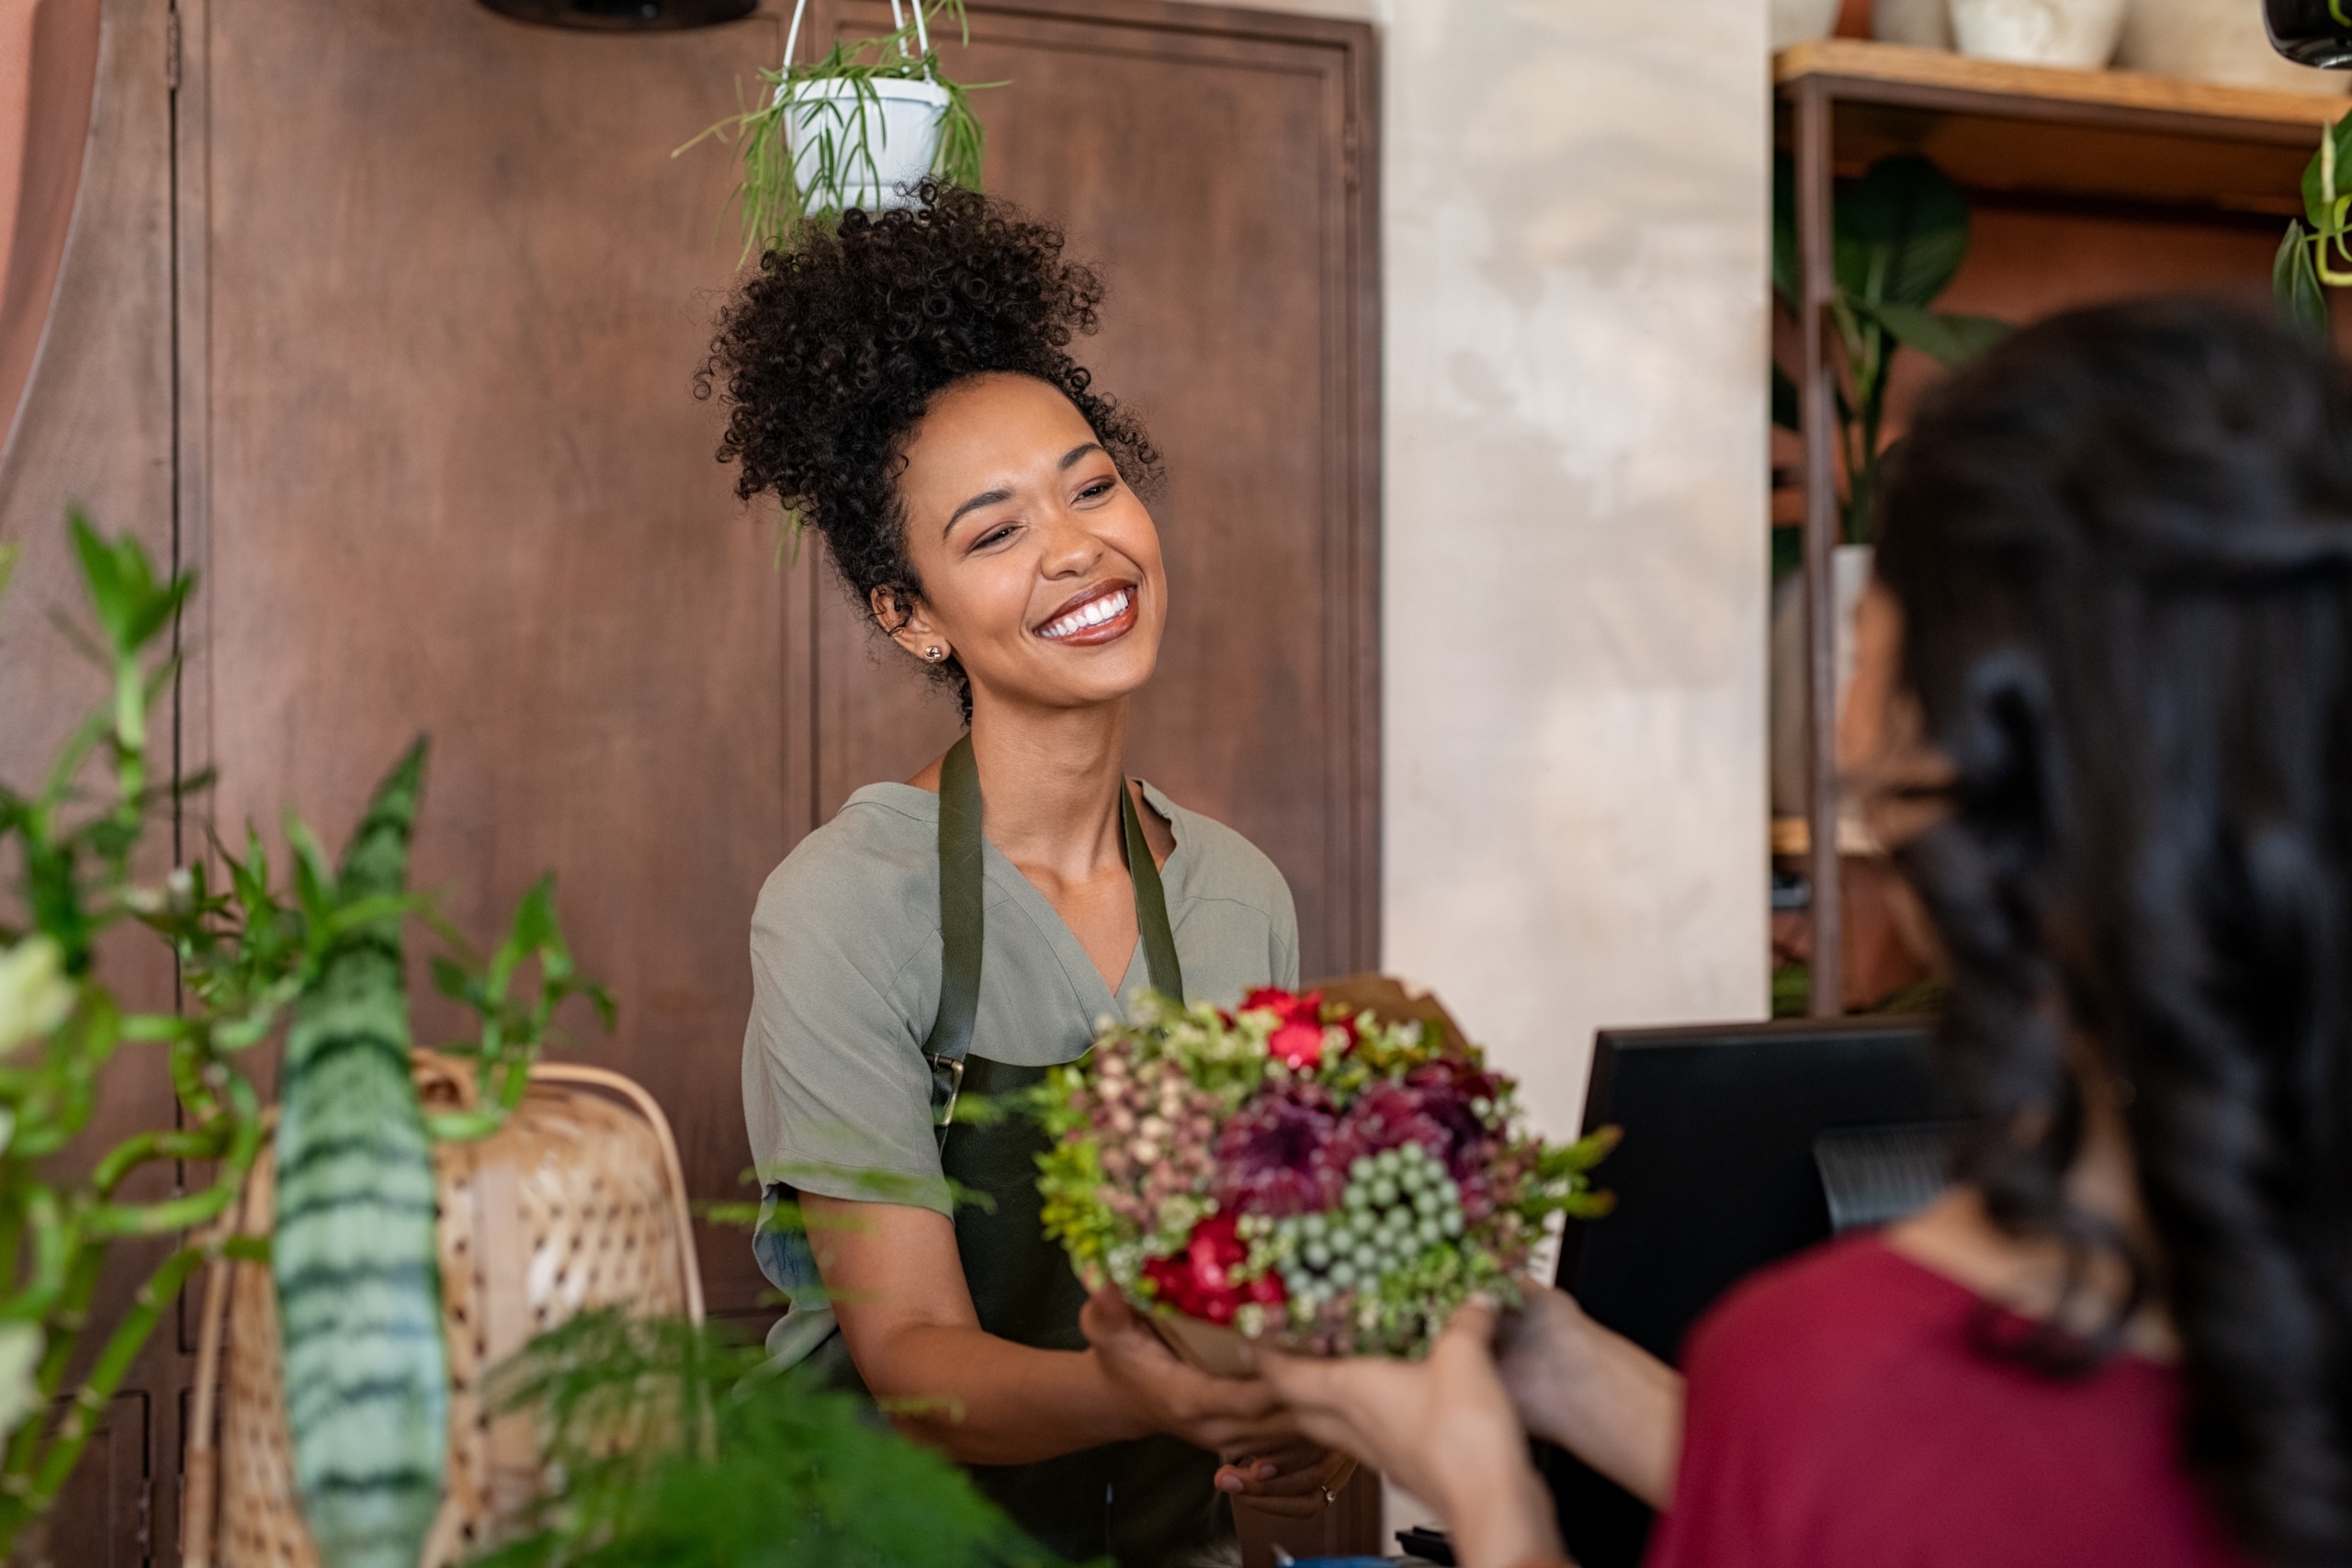 Happy black florist selling flowers to young woman